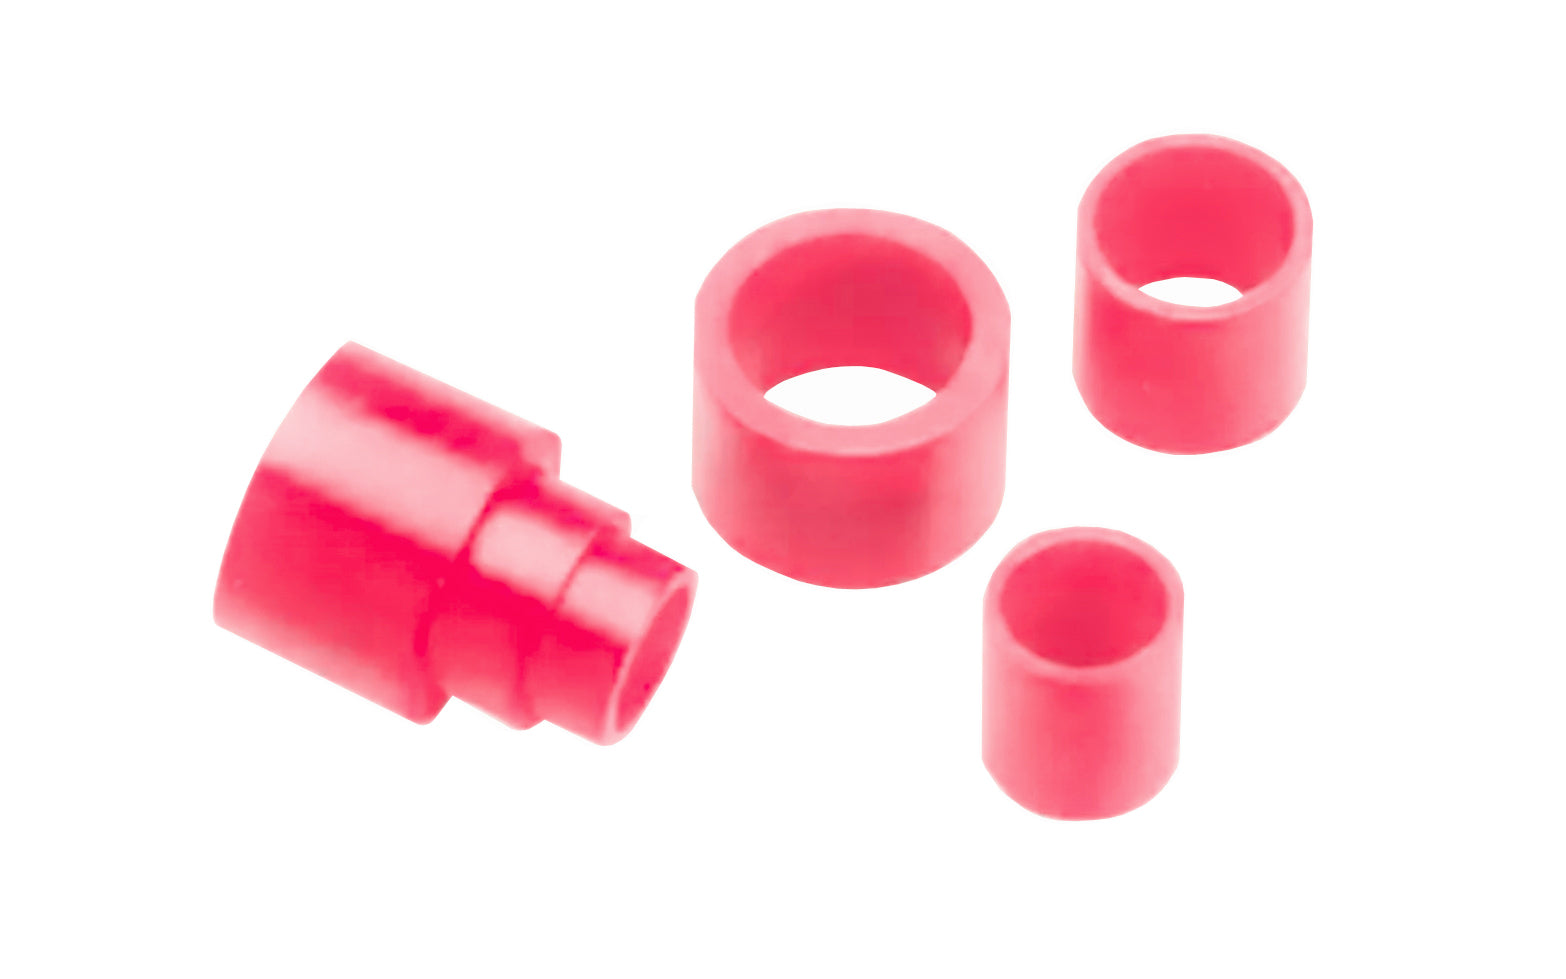 Pferd Telescoping Bushings for Bench Wheels - For 1" Thick Wheel. These Bench wheel bushings provide a method of reducing the wheel arbor to accommodate various spindle sizes. Bushing should be flush on both sides of the wheel, & should not interfere with the flanges. 097758690119. Model 69011. Made in Germany.